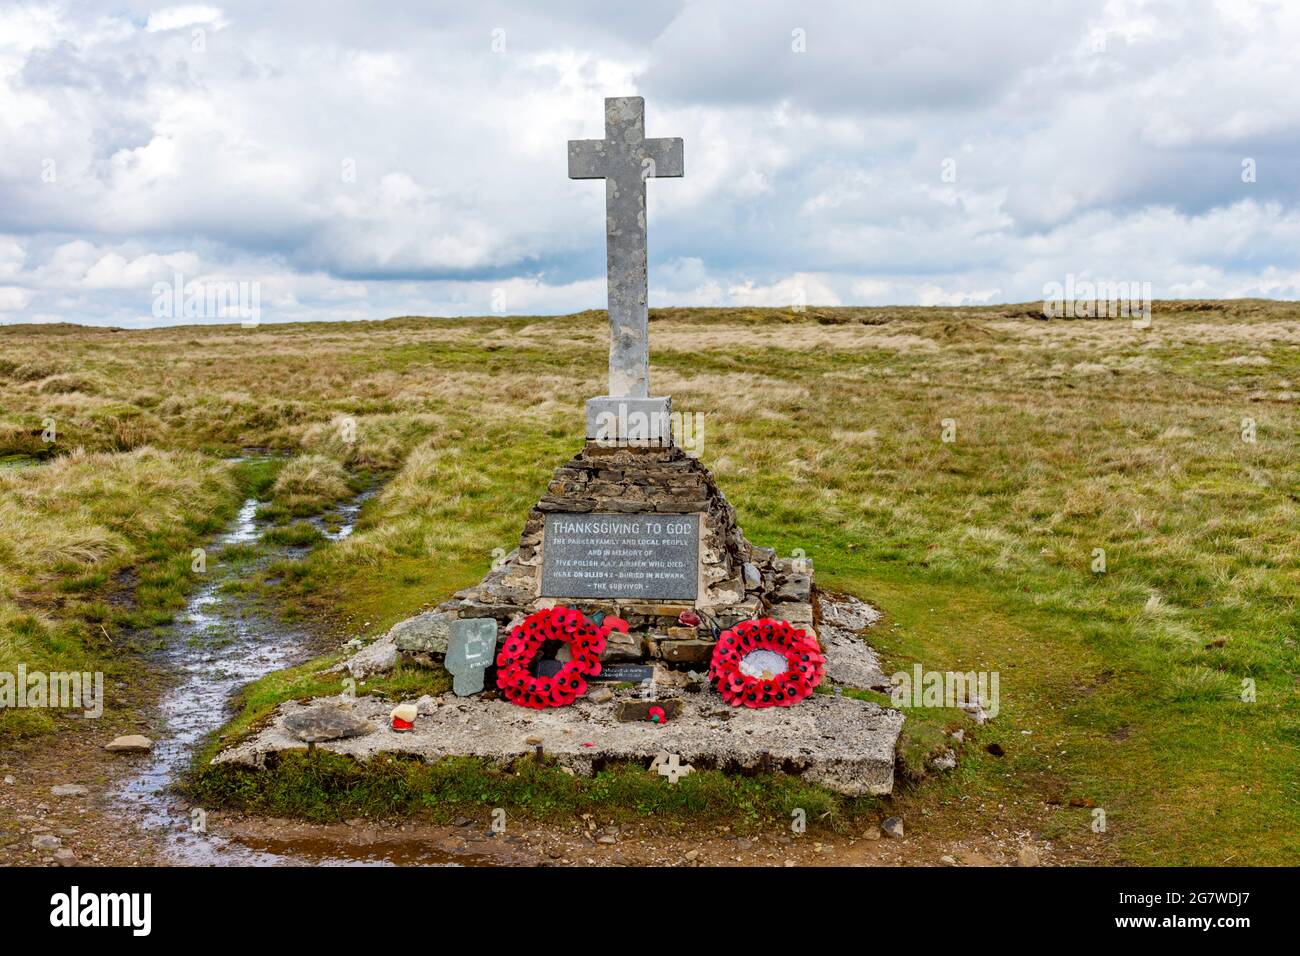 Memorial to five Polish airmen who died when their plane crashed here in 1942.  Buckden Pike, Wharfedale, Yorkshire Dales National Park, England, UK Stock Photo